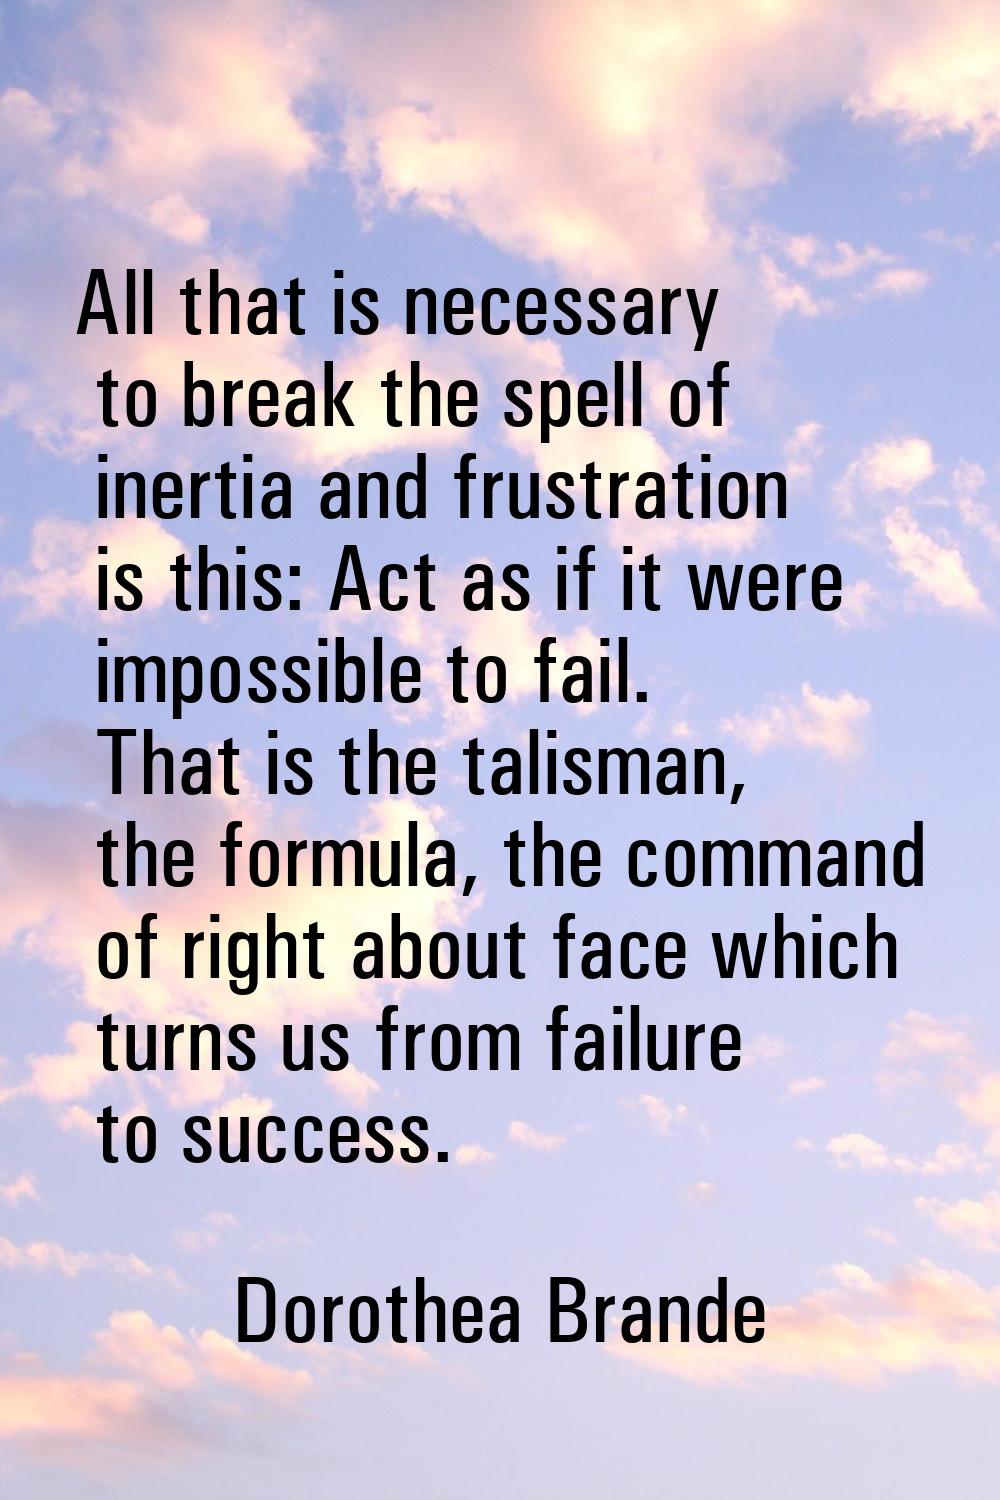 All that is necessary to break the spell of inertia and frustration is this: Act as if it were impo